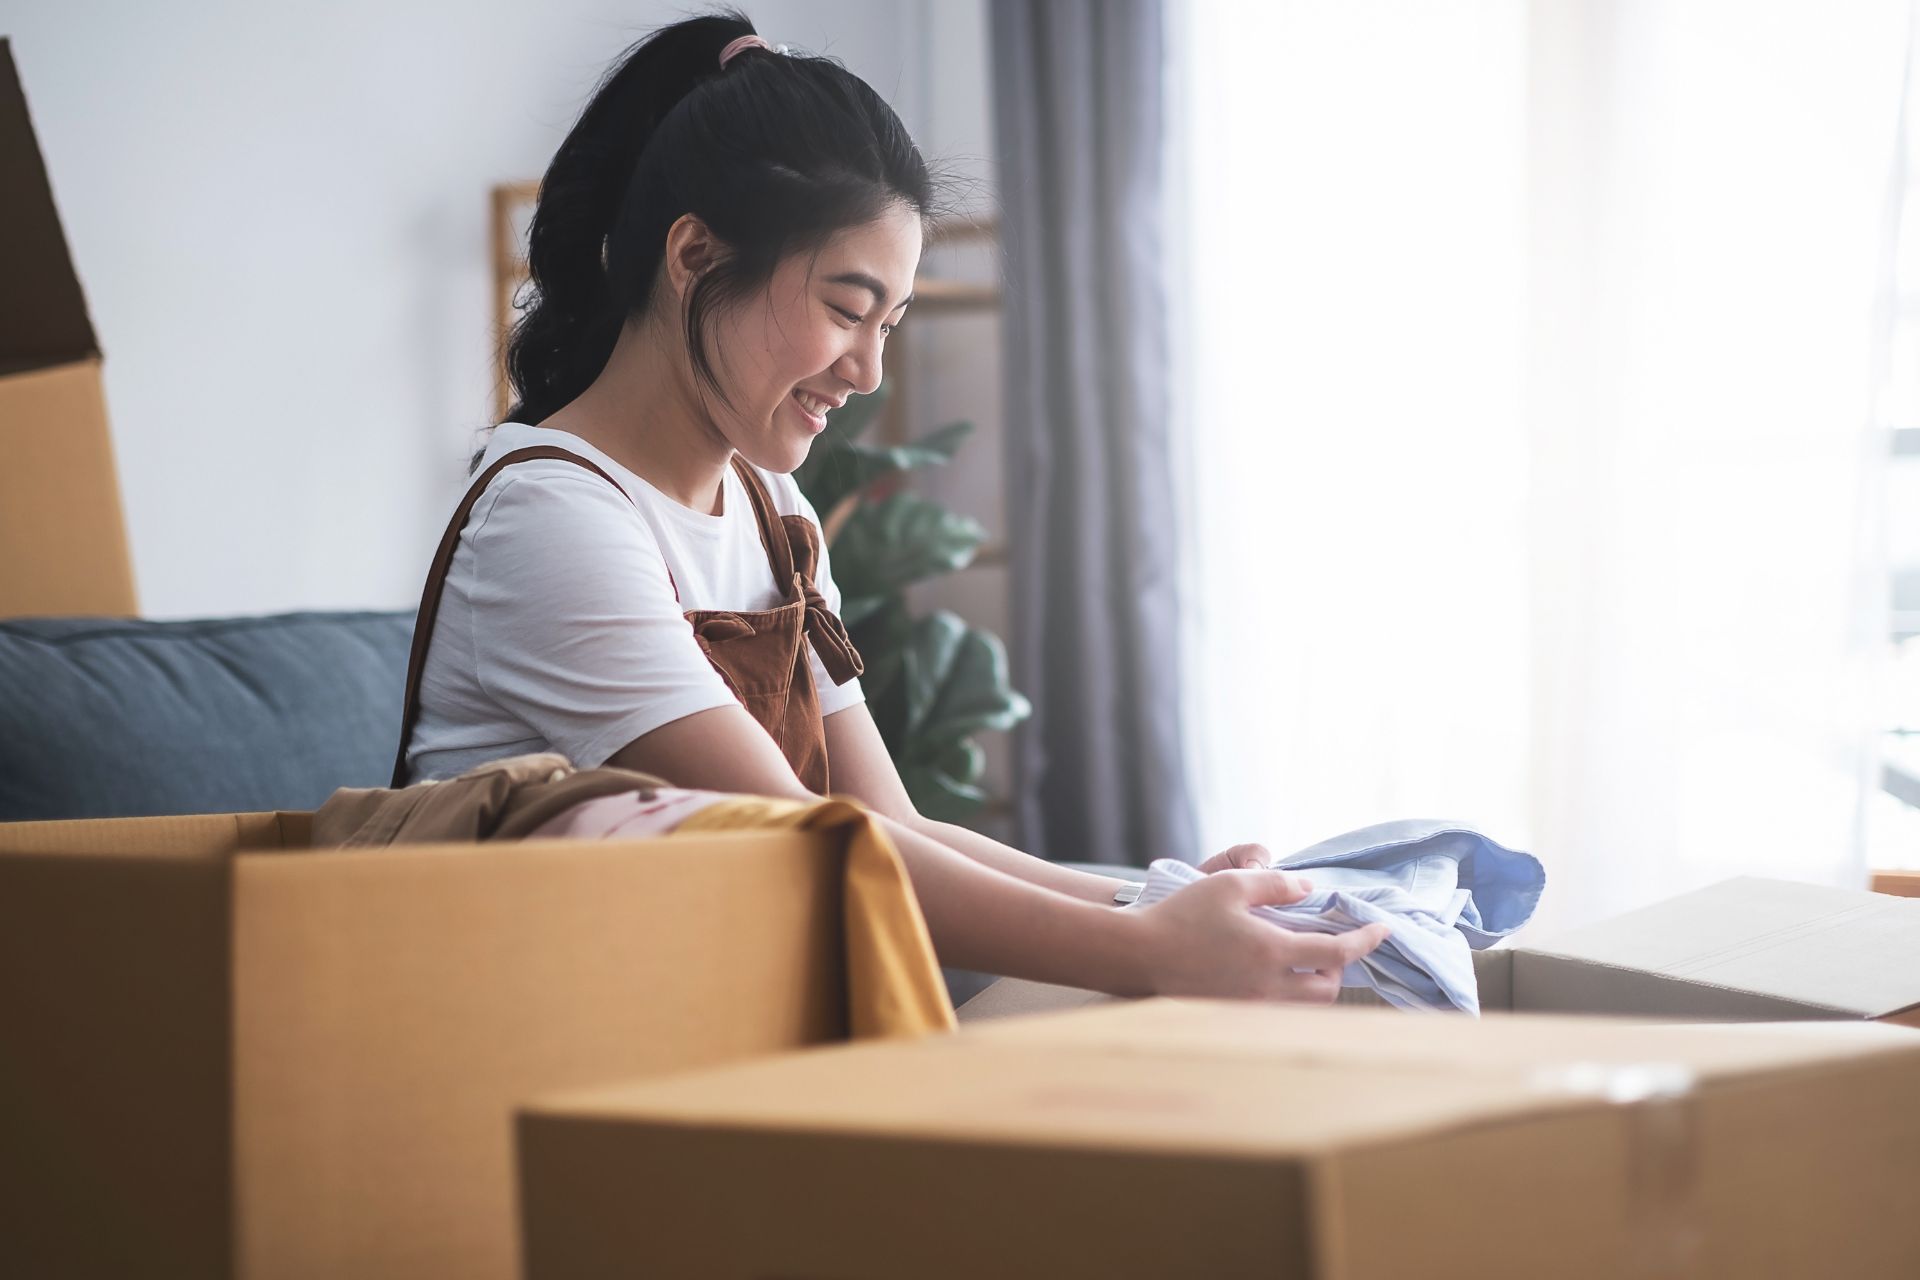 Image of a young woman unpacking boxes in a new home